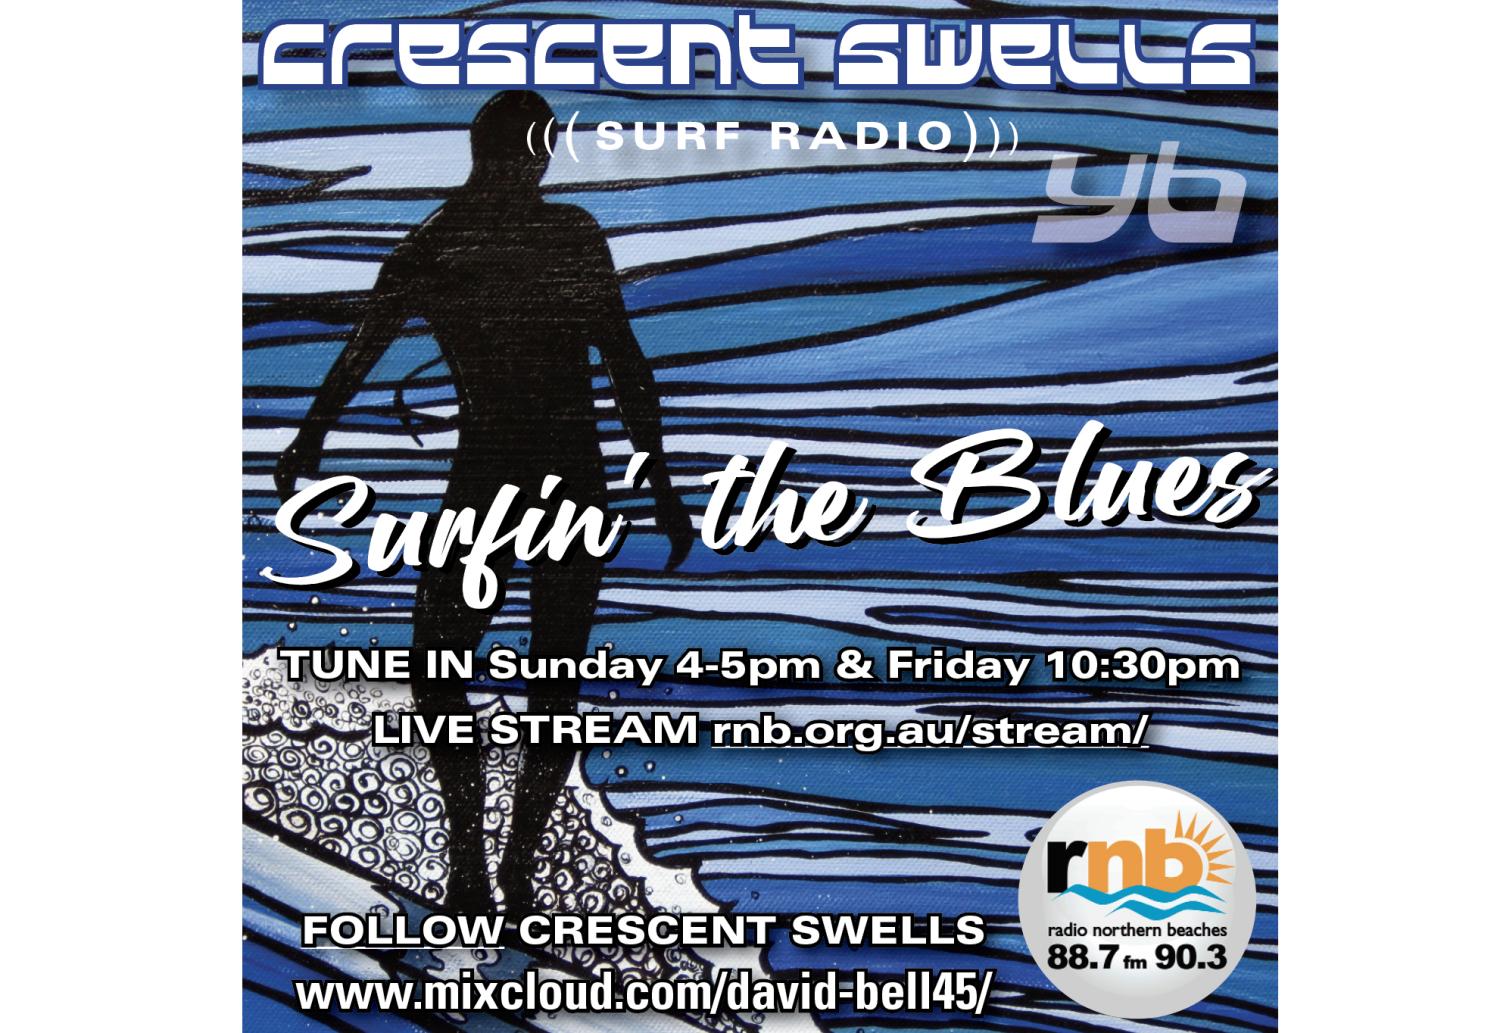 Image 1 for “Surfing the Blues” with Crescent Swells – track list, tune in 